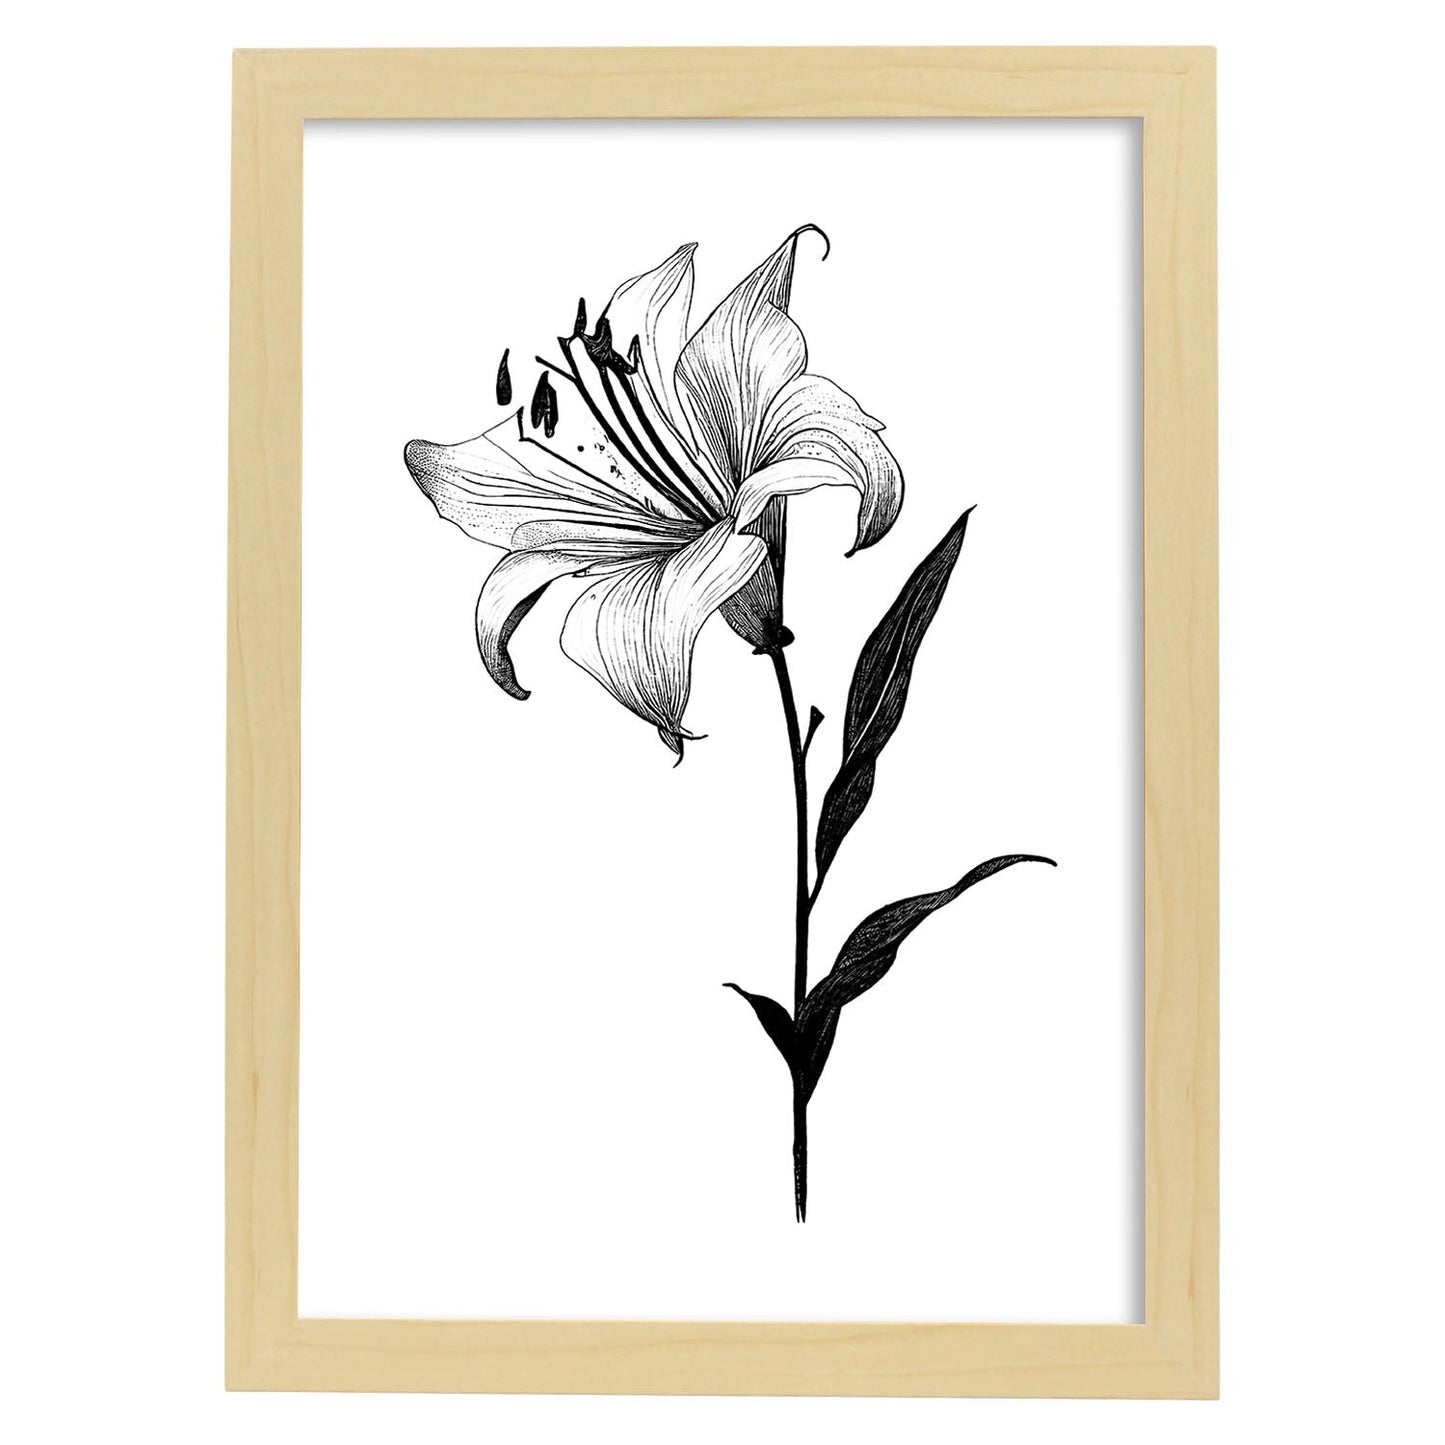 Nacnic Lily Minimalist Line Art_1. Aesthetic Wall Art Prints for Bedroom or Living Room Design.